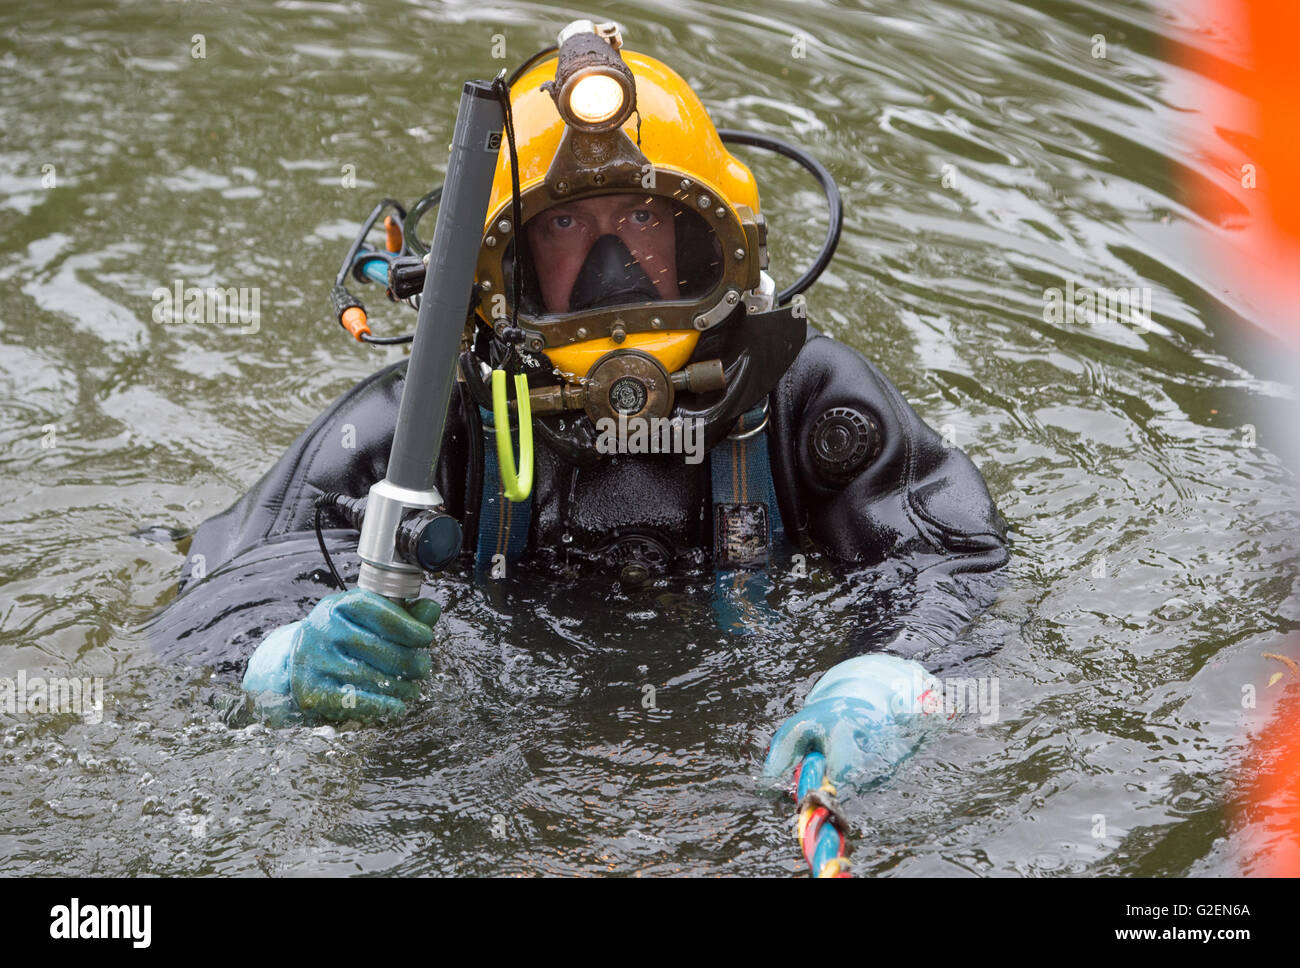 Schwalmstadt, Germany. 30th May, 2016. Munitions diver Krister Josepheit dives for munitions in the historical moat in Schwalmstadt, Germany, 30 May 2016. Retreating German troops used the moat to dispose of remaining munitions at the end of the 2nd World War. Over the next few months, these will be salvaged from the partly meter-thick slit. Photo: BORIS ROESSLER/dpa/Alamy Live News Stock Photo